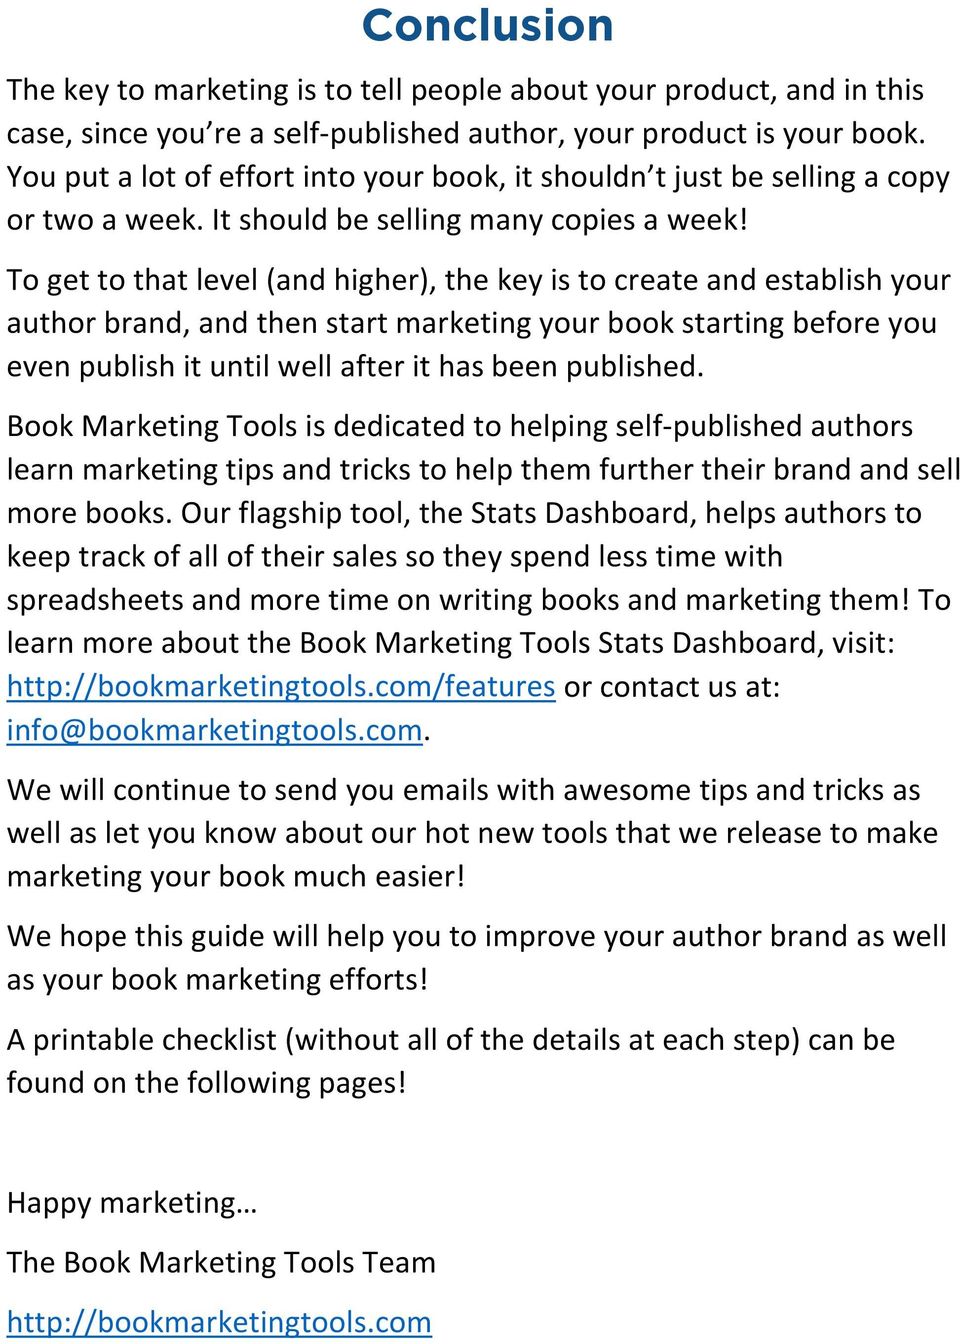 To get to that level (and higher), the key is to create and establish your author brand, and then start marketing your book starting before you even publish it until well after it has been published.